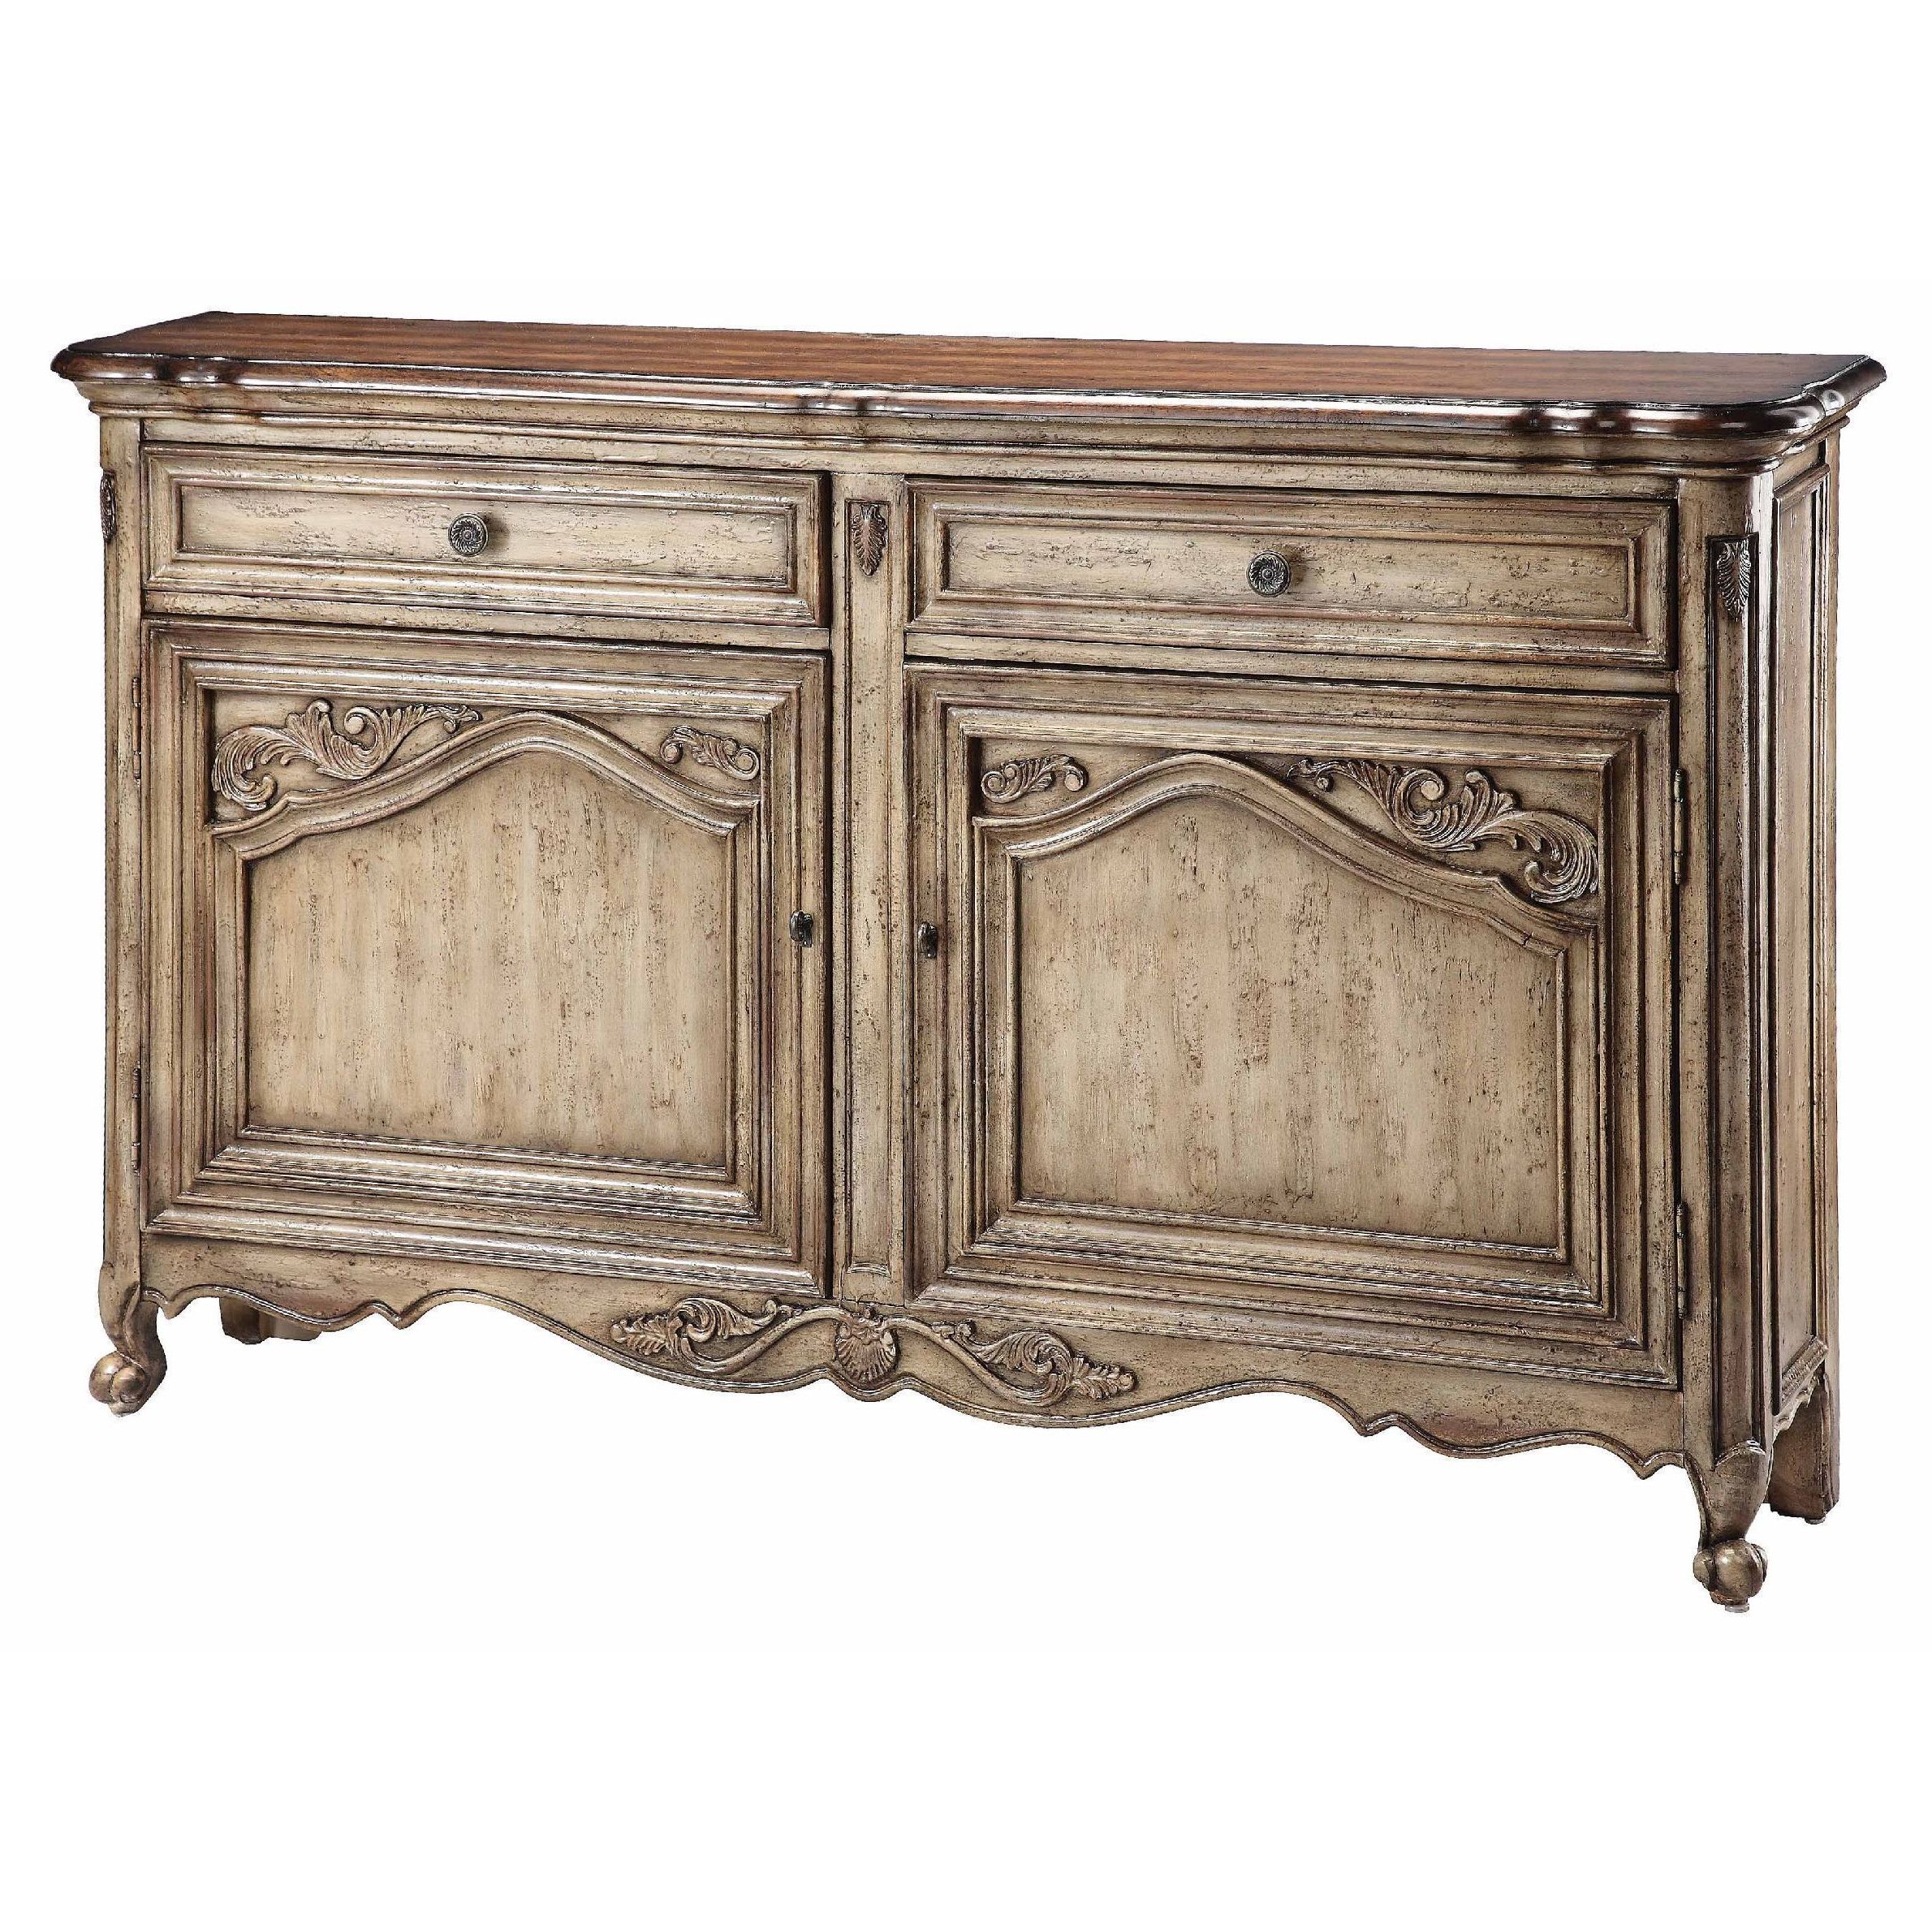 The Gentry Regal Sideboard Will Be A Beautiful And Welcomed Regarding Dormer Sideboards (View 2 of 20)